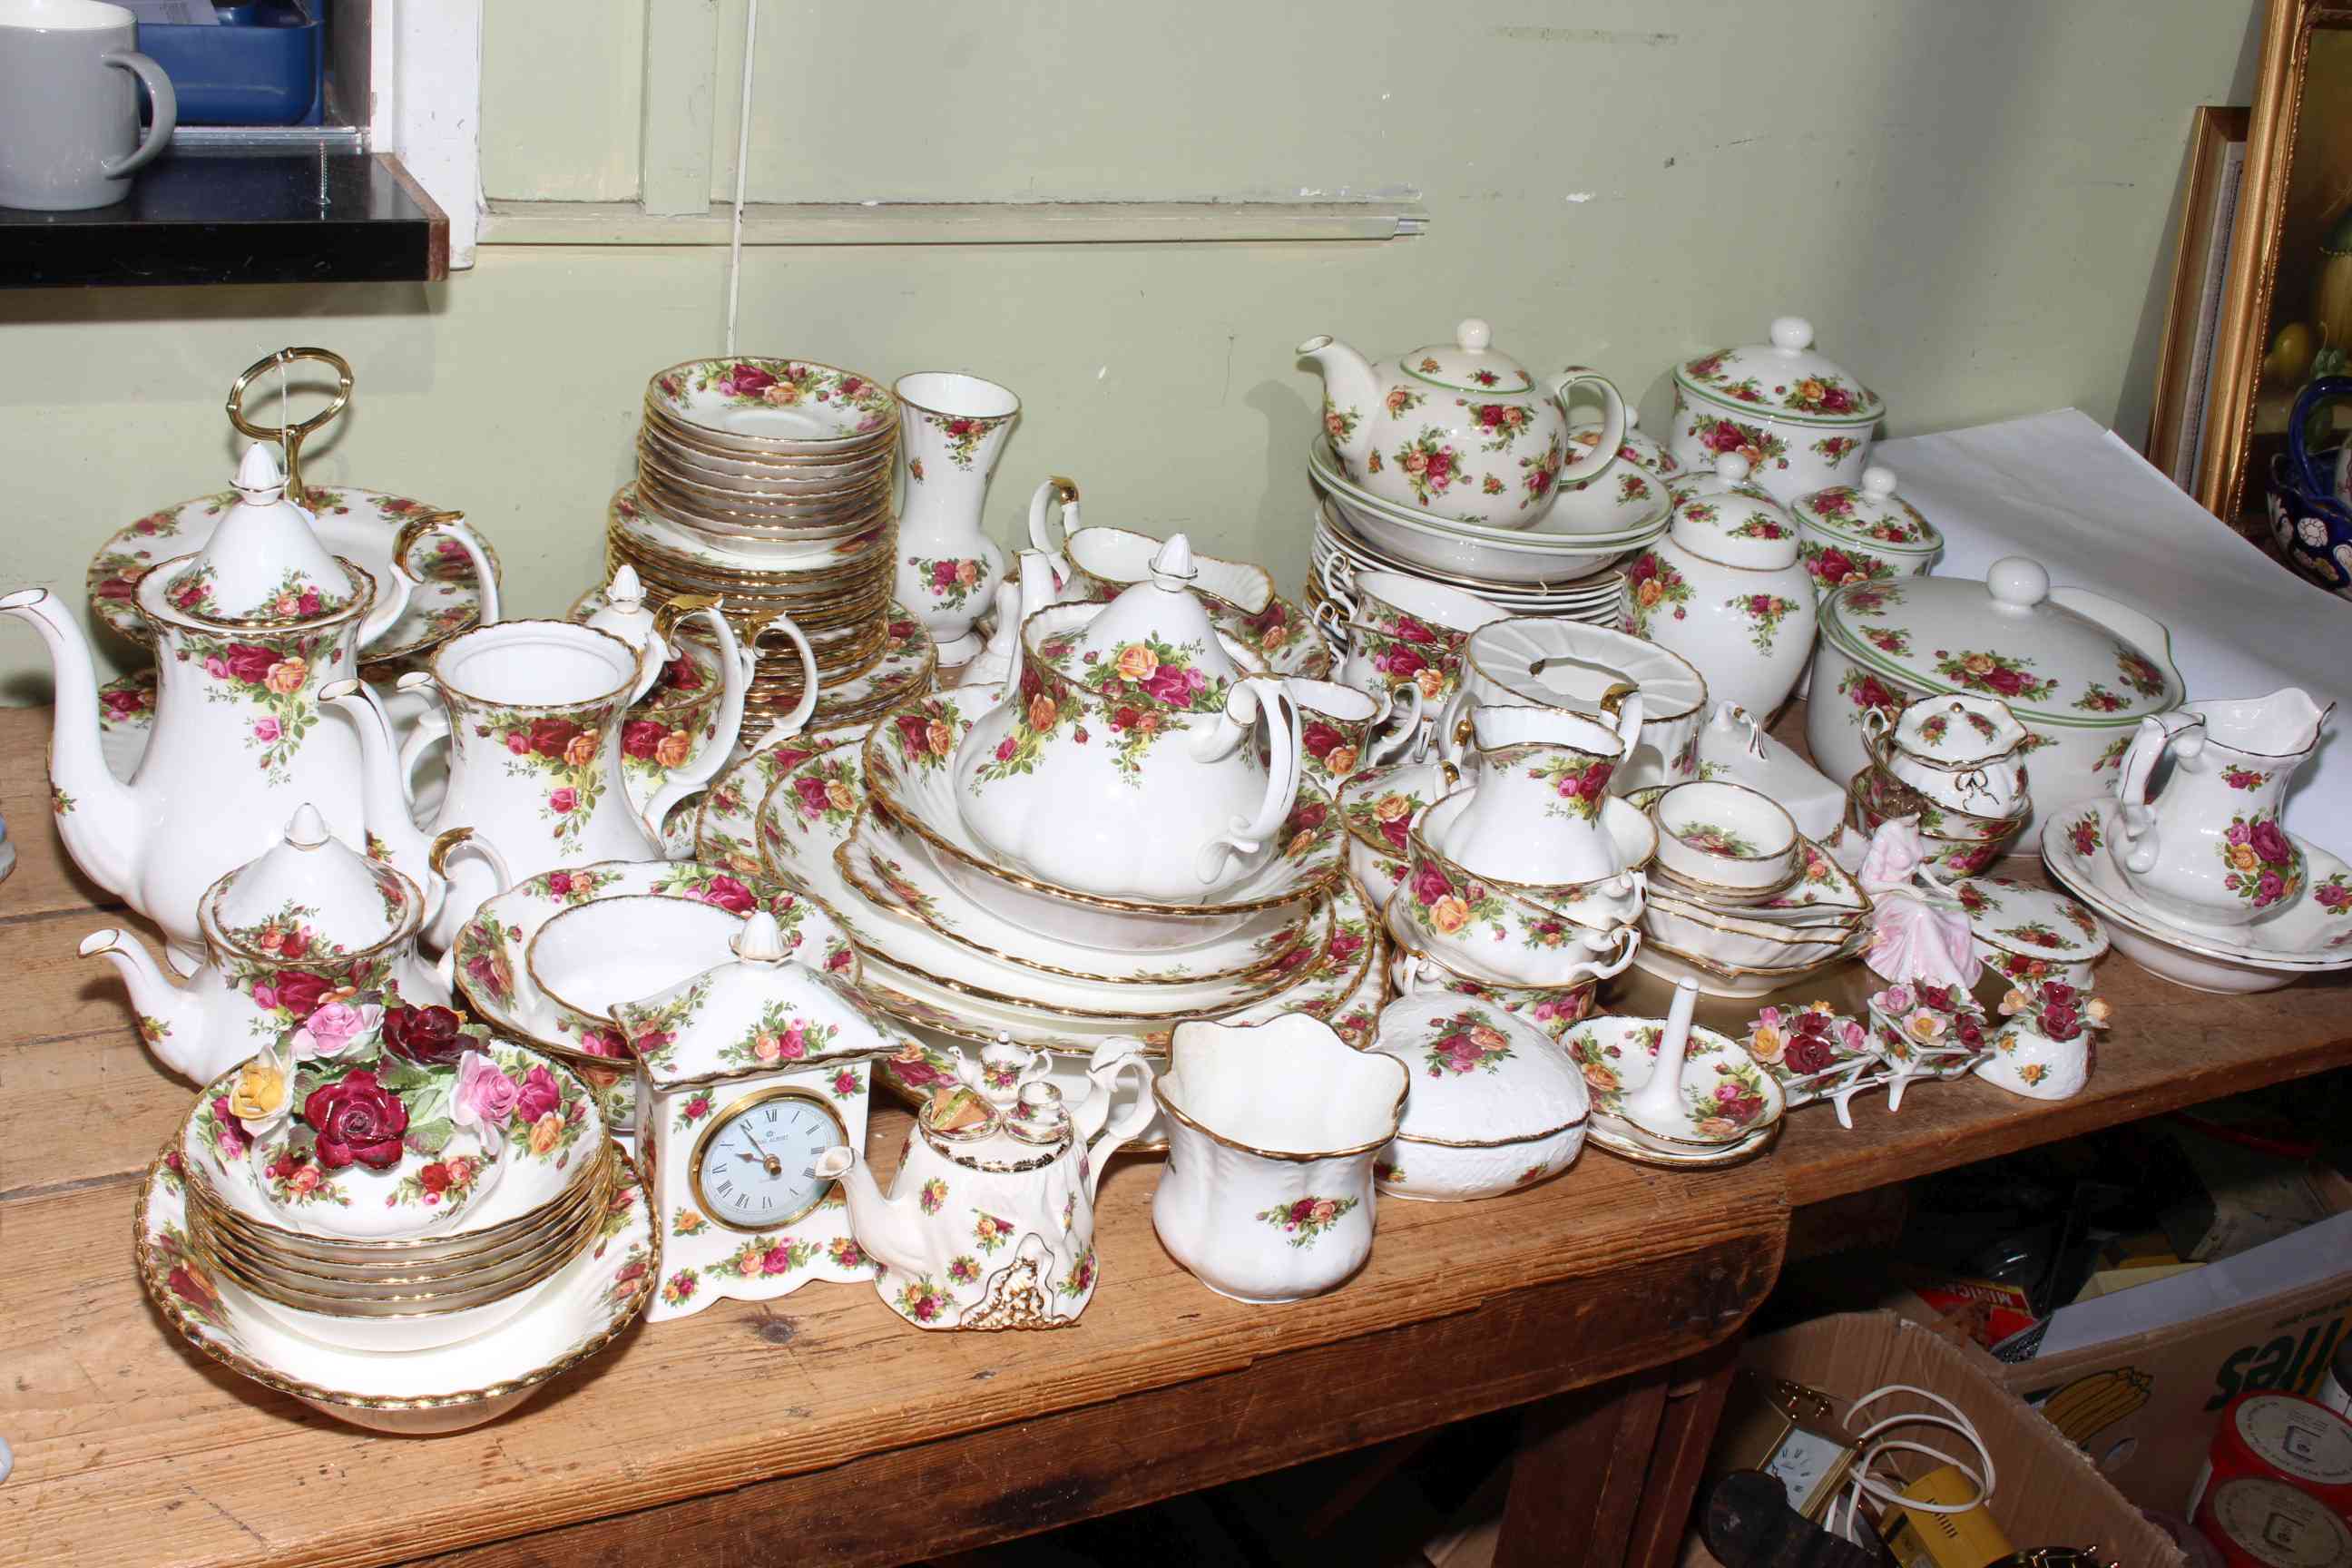 A Good collection of Royal Albert Old Country Roses including teapots, cake stand etc,